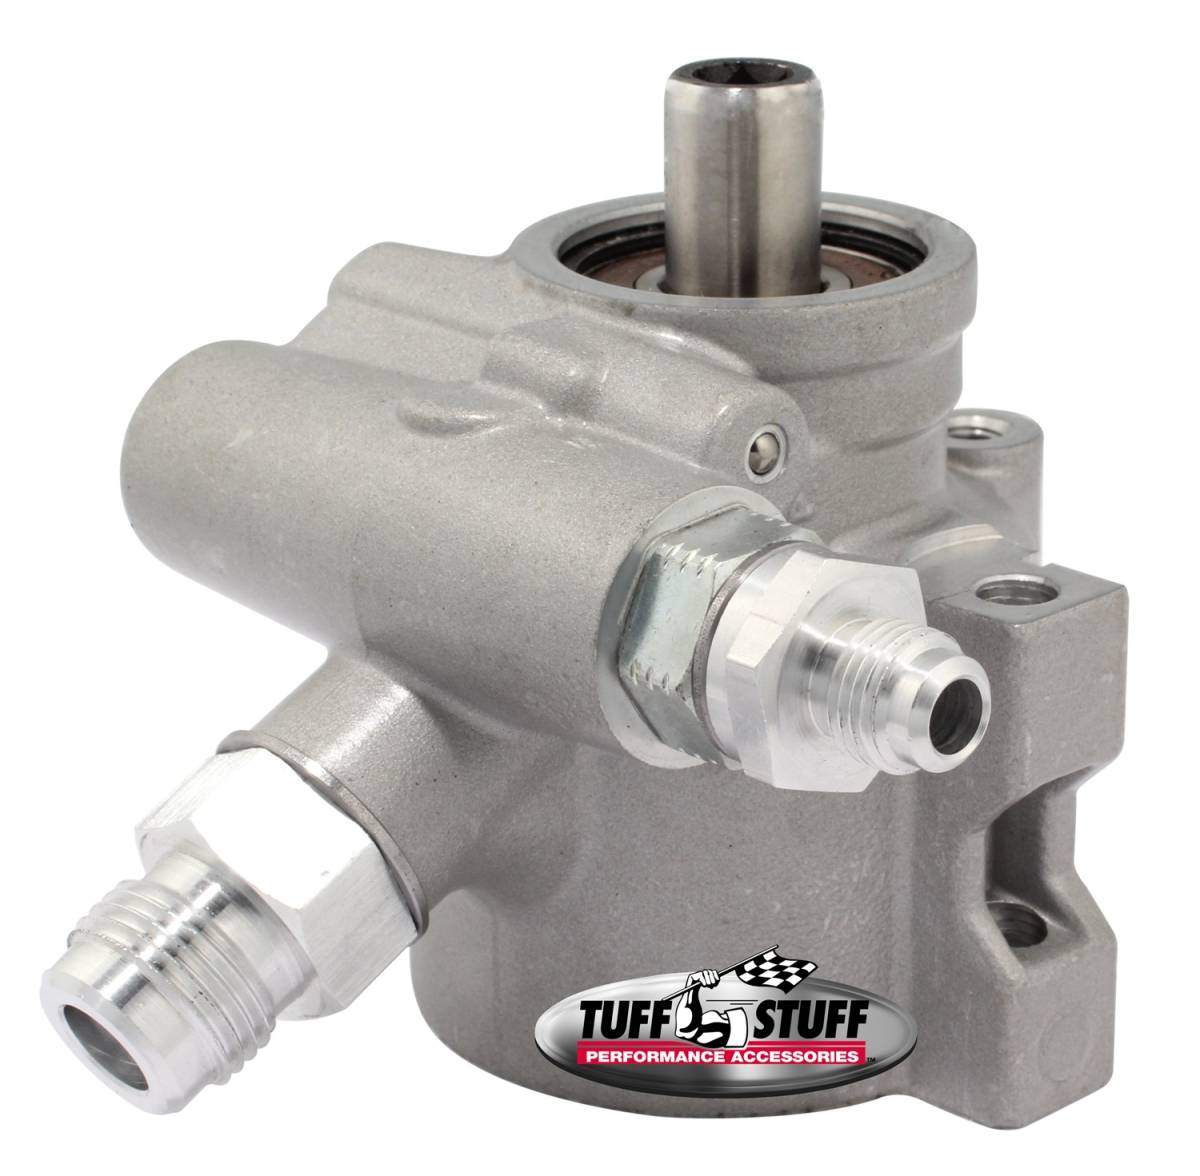 Tuff Stuff Performance - Type II Alum. Power Steering Pump An-6 And AN-10 Fittings M8x1.25 Threaded Hole Mounting Aluminum For Street Rods/Custom Vehicles w/Limited Engine Space Factory Cast PLUS+ 6175AL-2